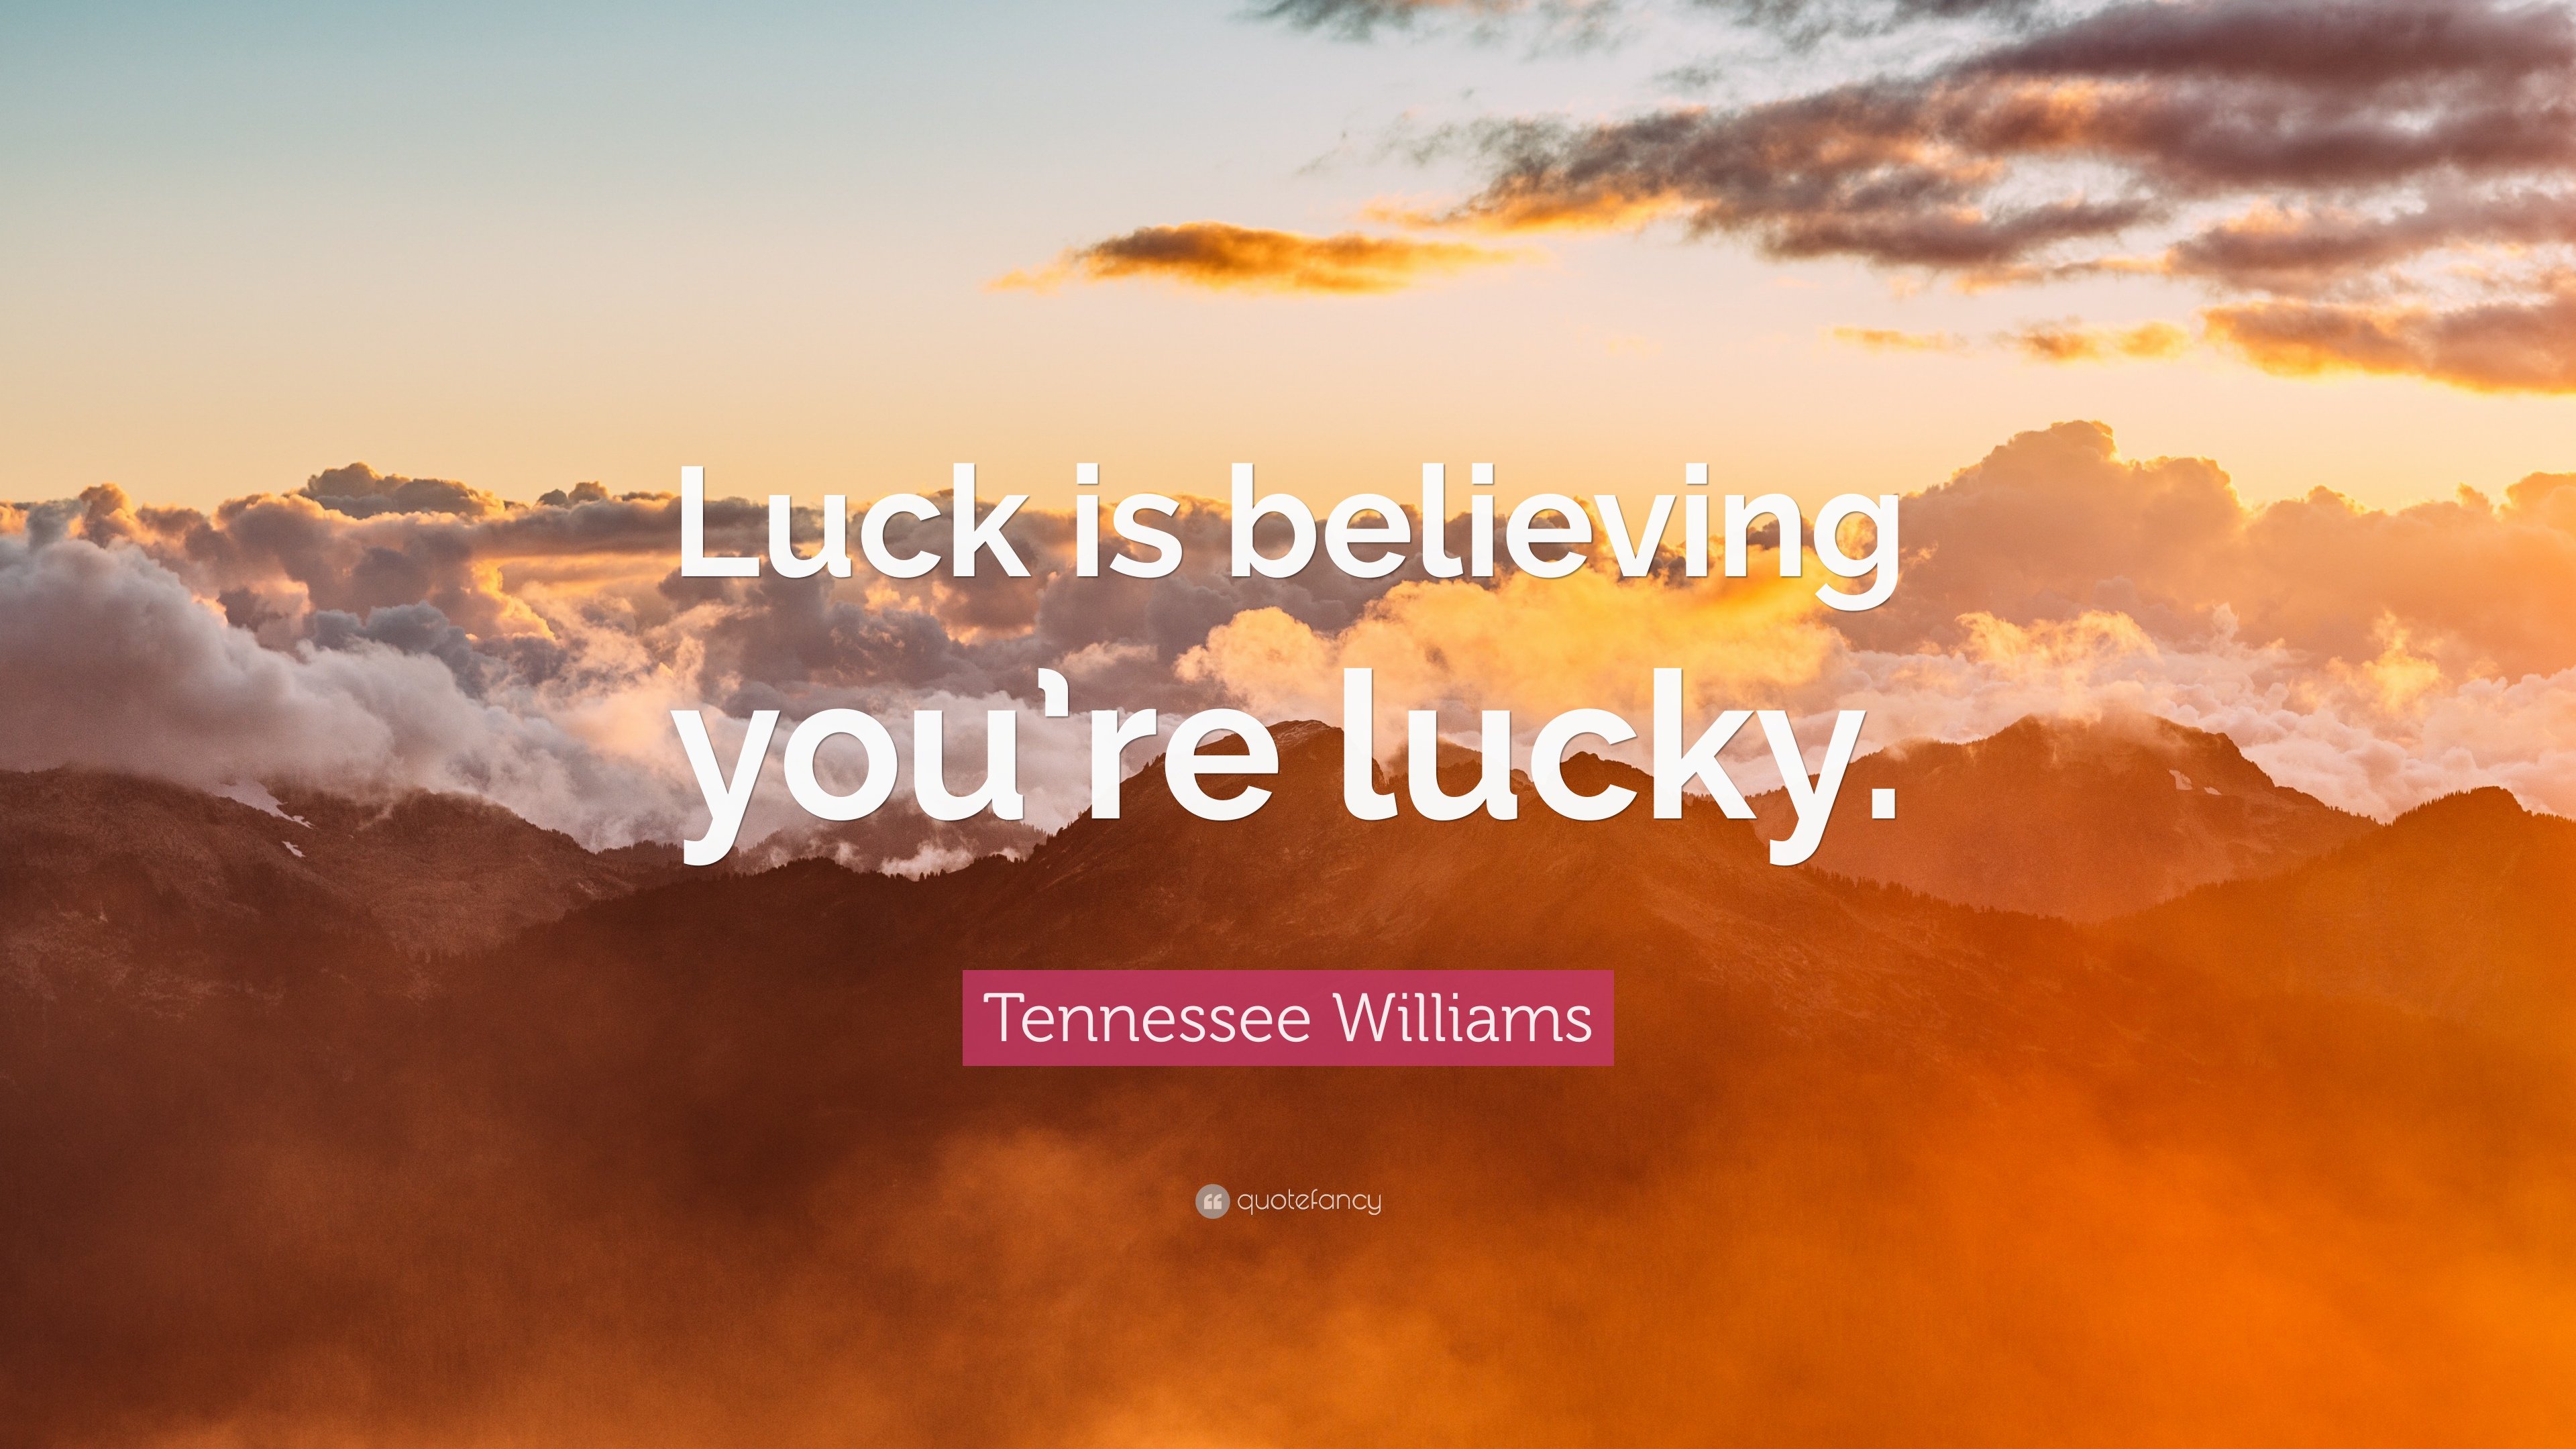 Tennessee Williams Quote: “Luck is believing you're lucky.” 12